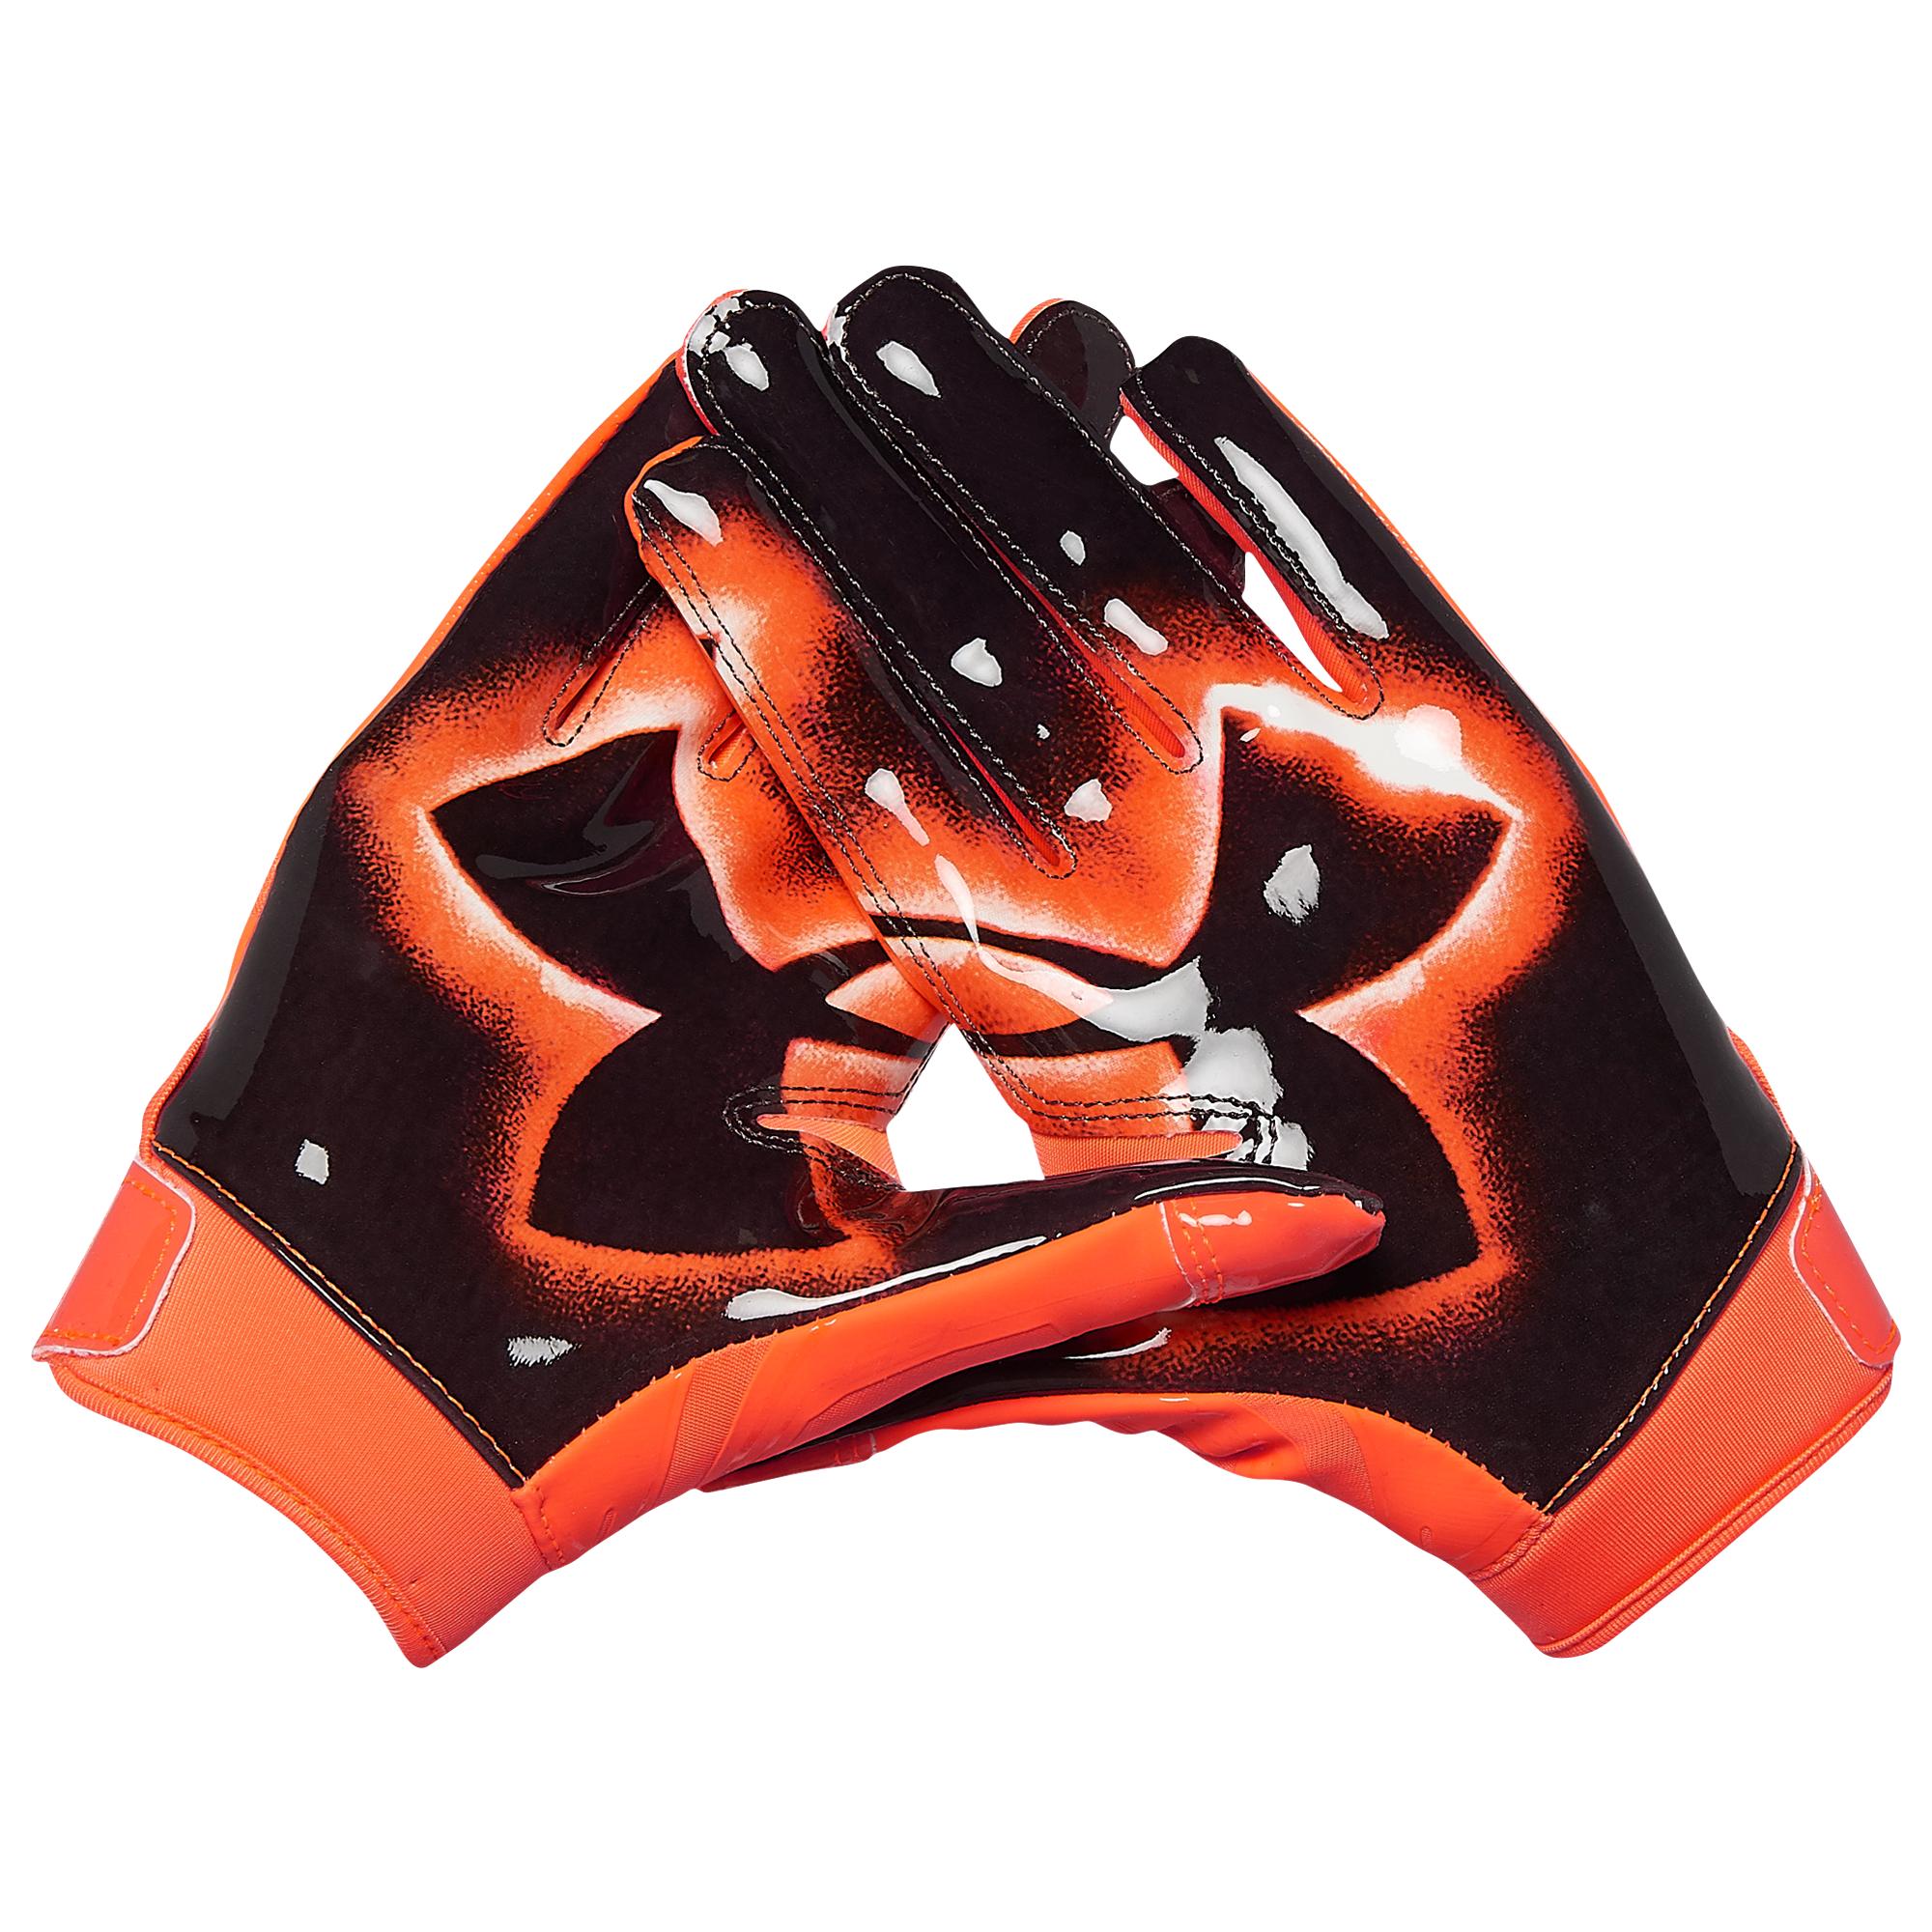 Under Armour Youth Football Gloves F6 Discounts Shoponline, 47% OFF |  bvh.edu.gt